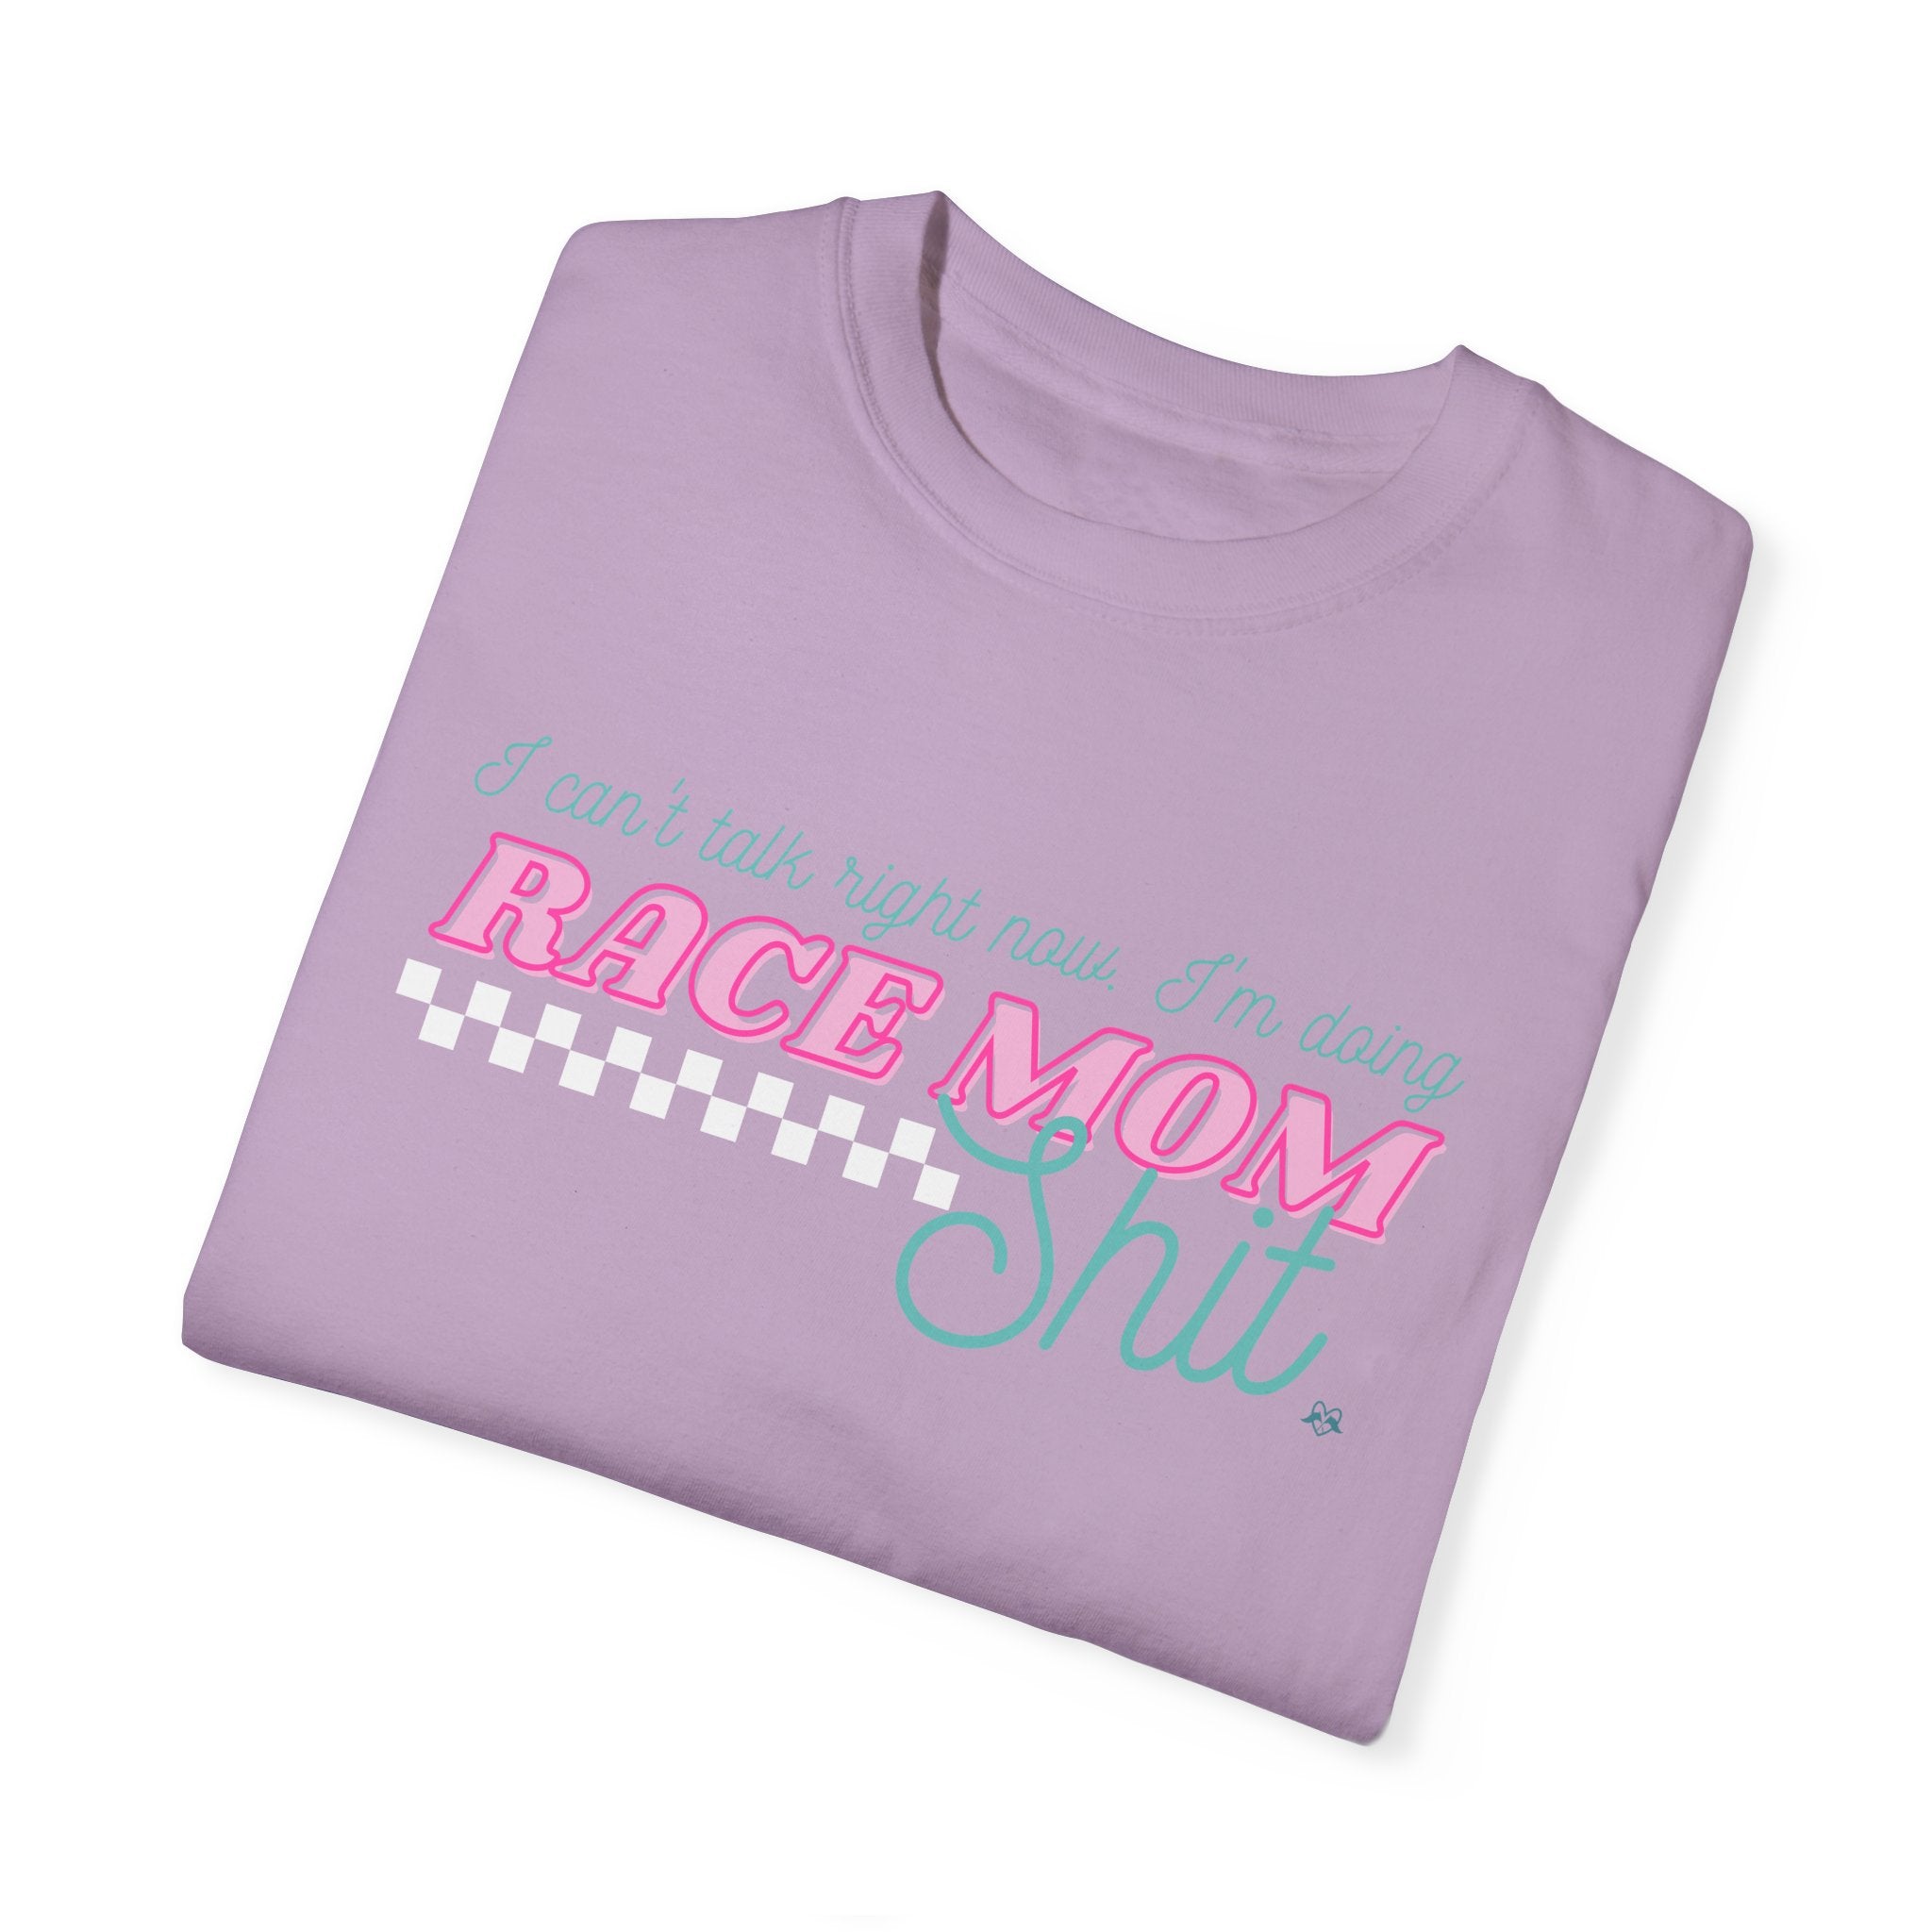 I Can't Talk Right Now I'm Doing Race Mom Shit Unisex Heavyweight Ladies Racing Tee